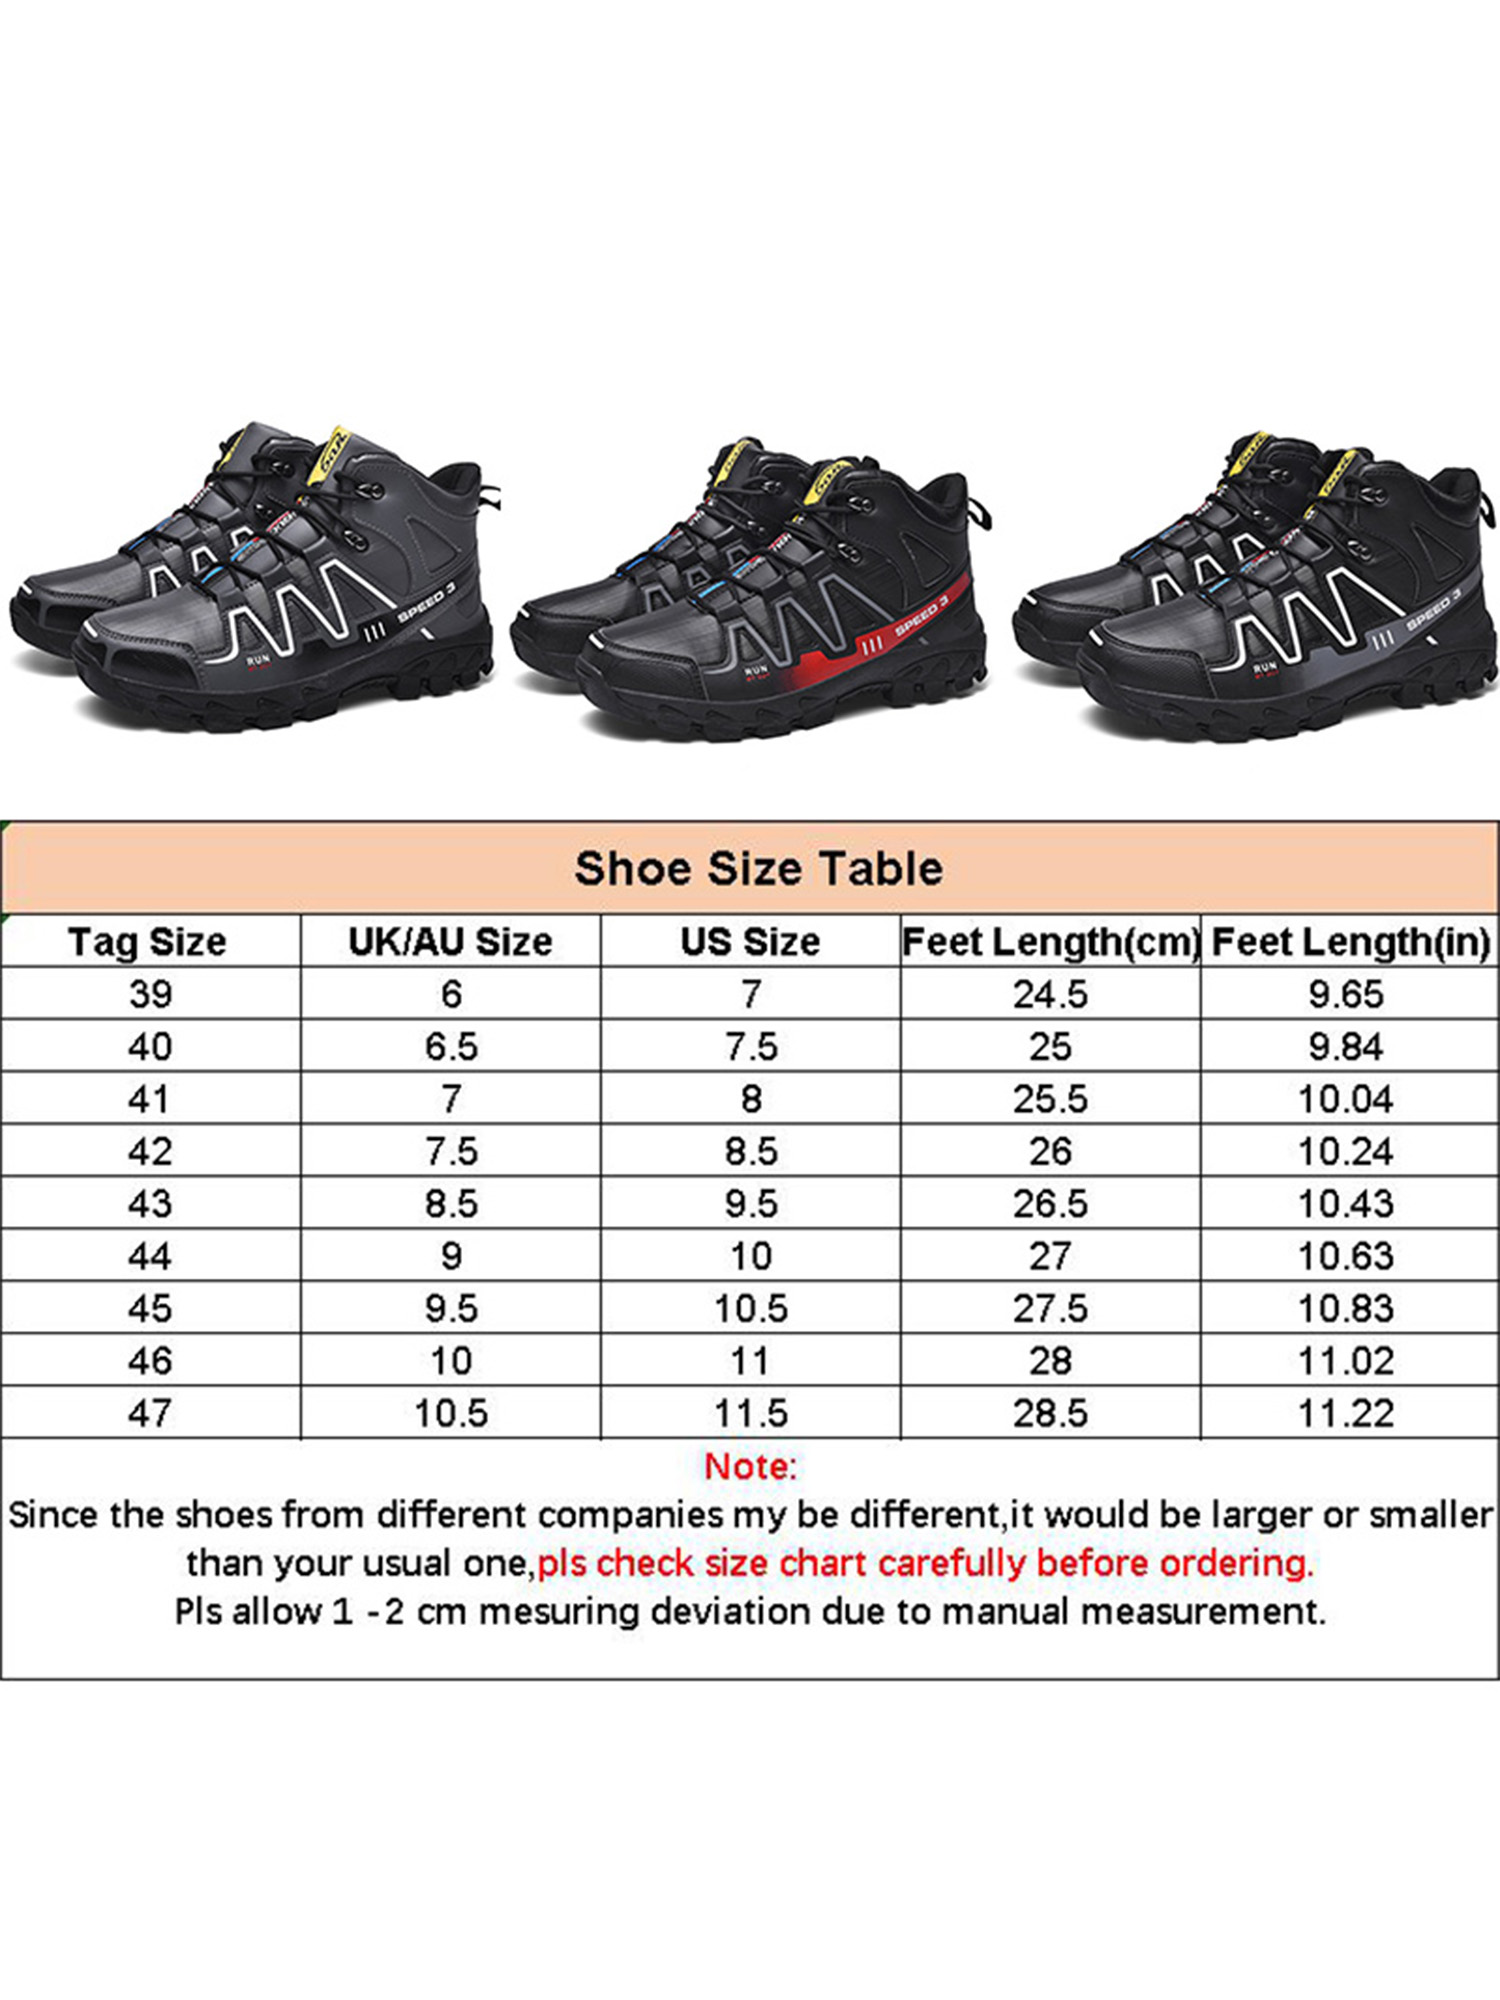 Avamo Steel Toe Shoes Men Safety Work Shoes Slip Resistant Industrial Construction Shoes High Top Boots - image 2 of 7